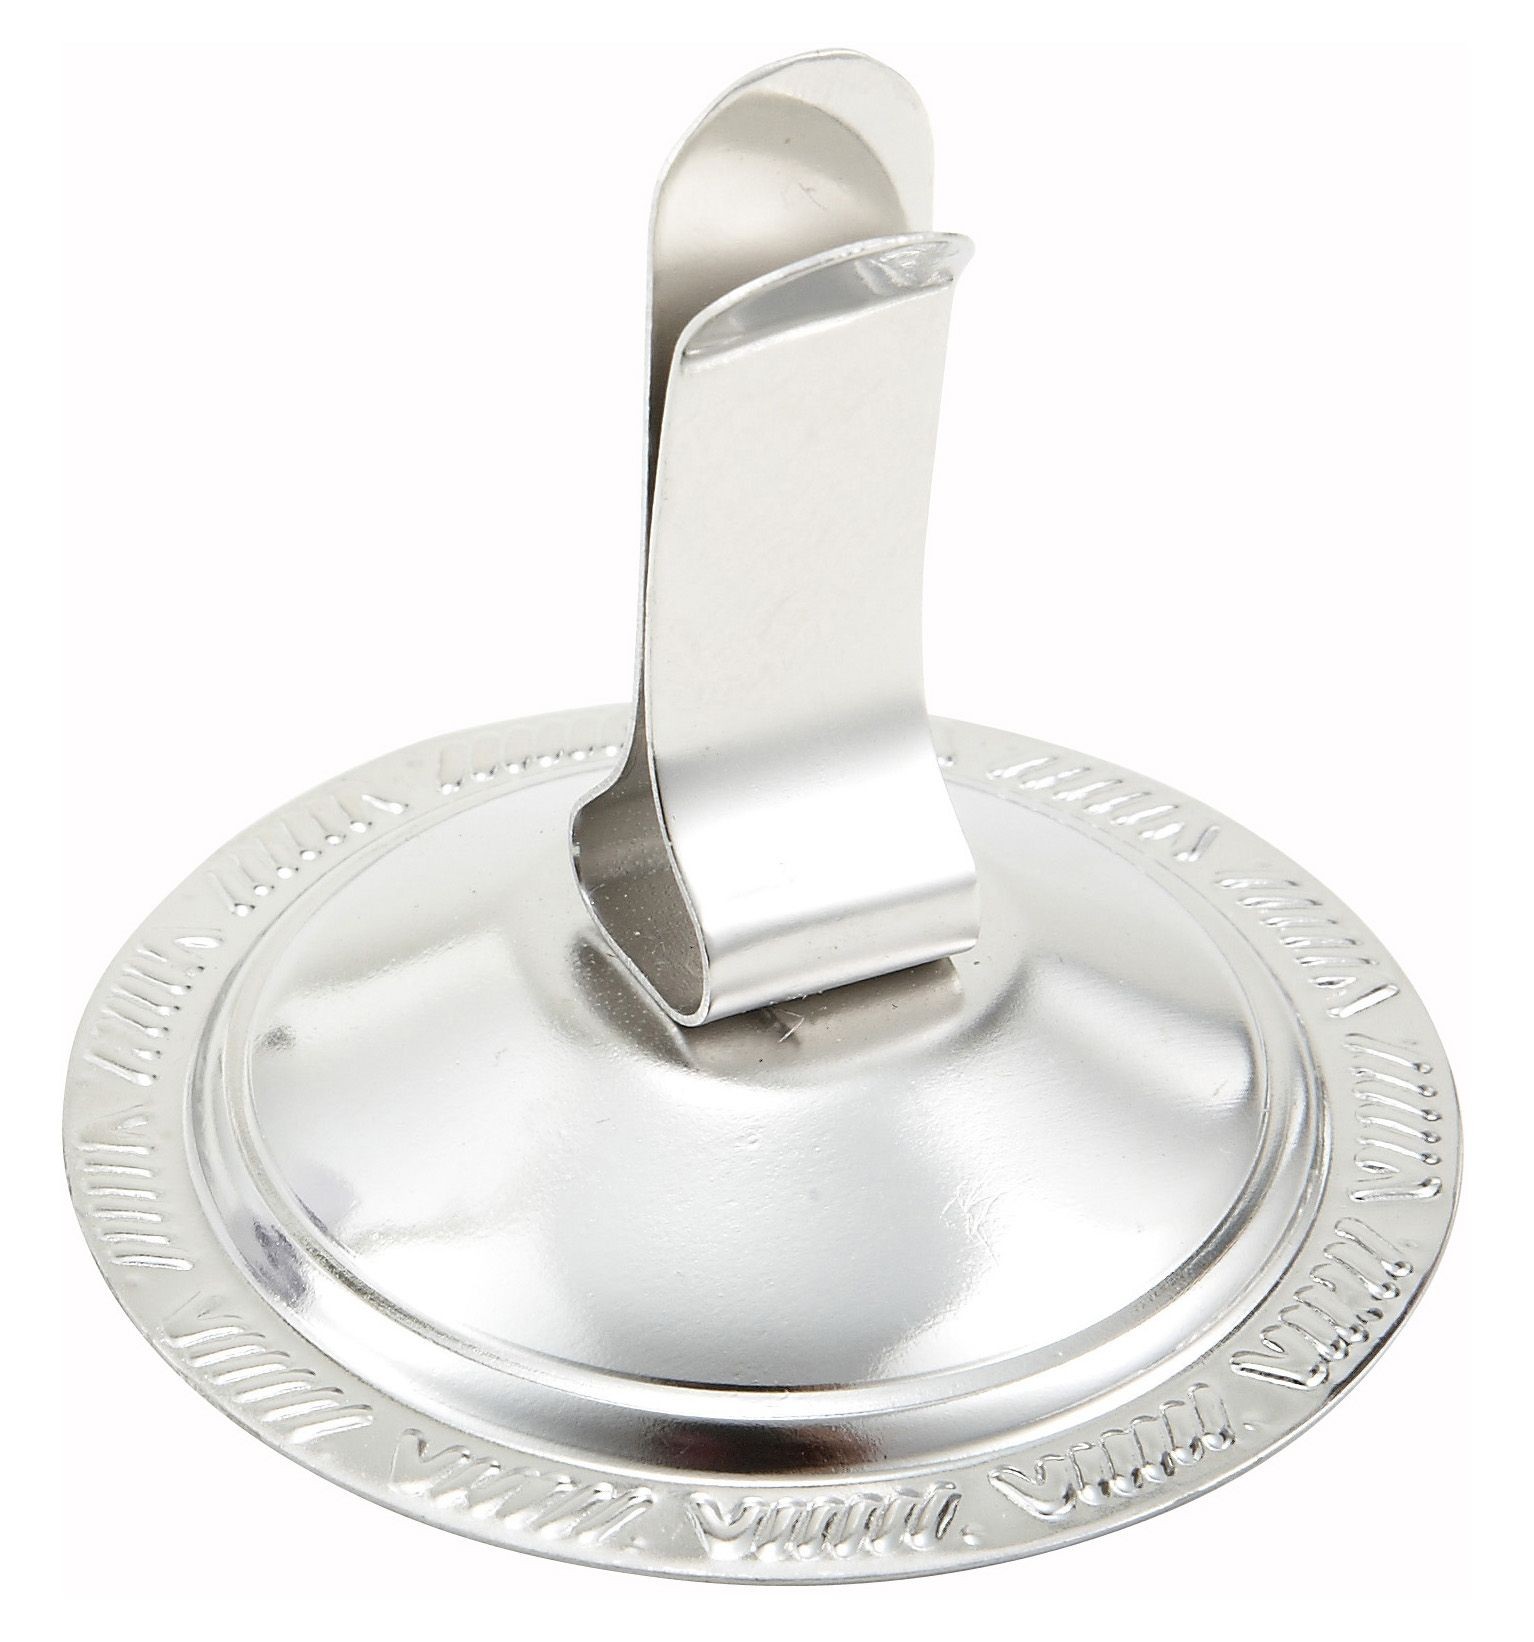 Winco MH-2C Stainless Steel Clip-Style Menu/Card Holder 2-1/2" x 2-1/2"